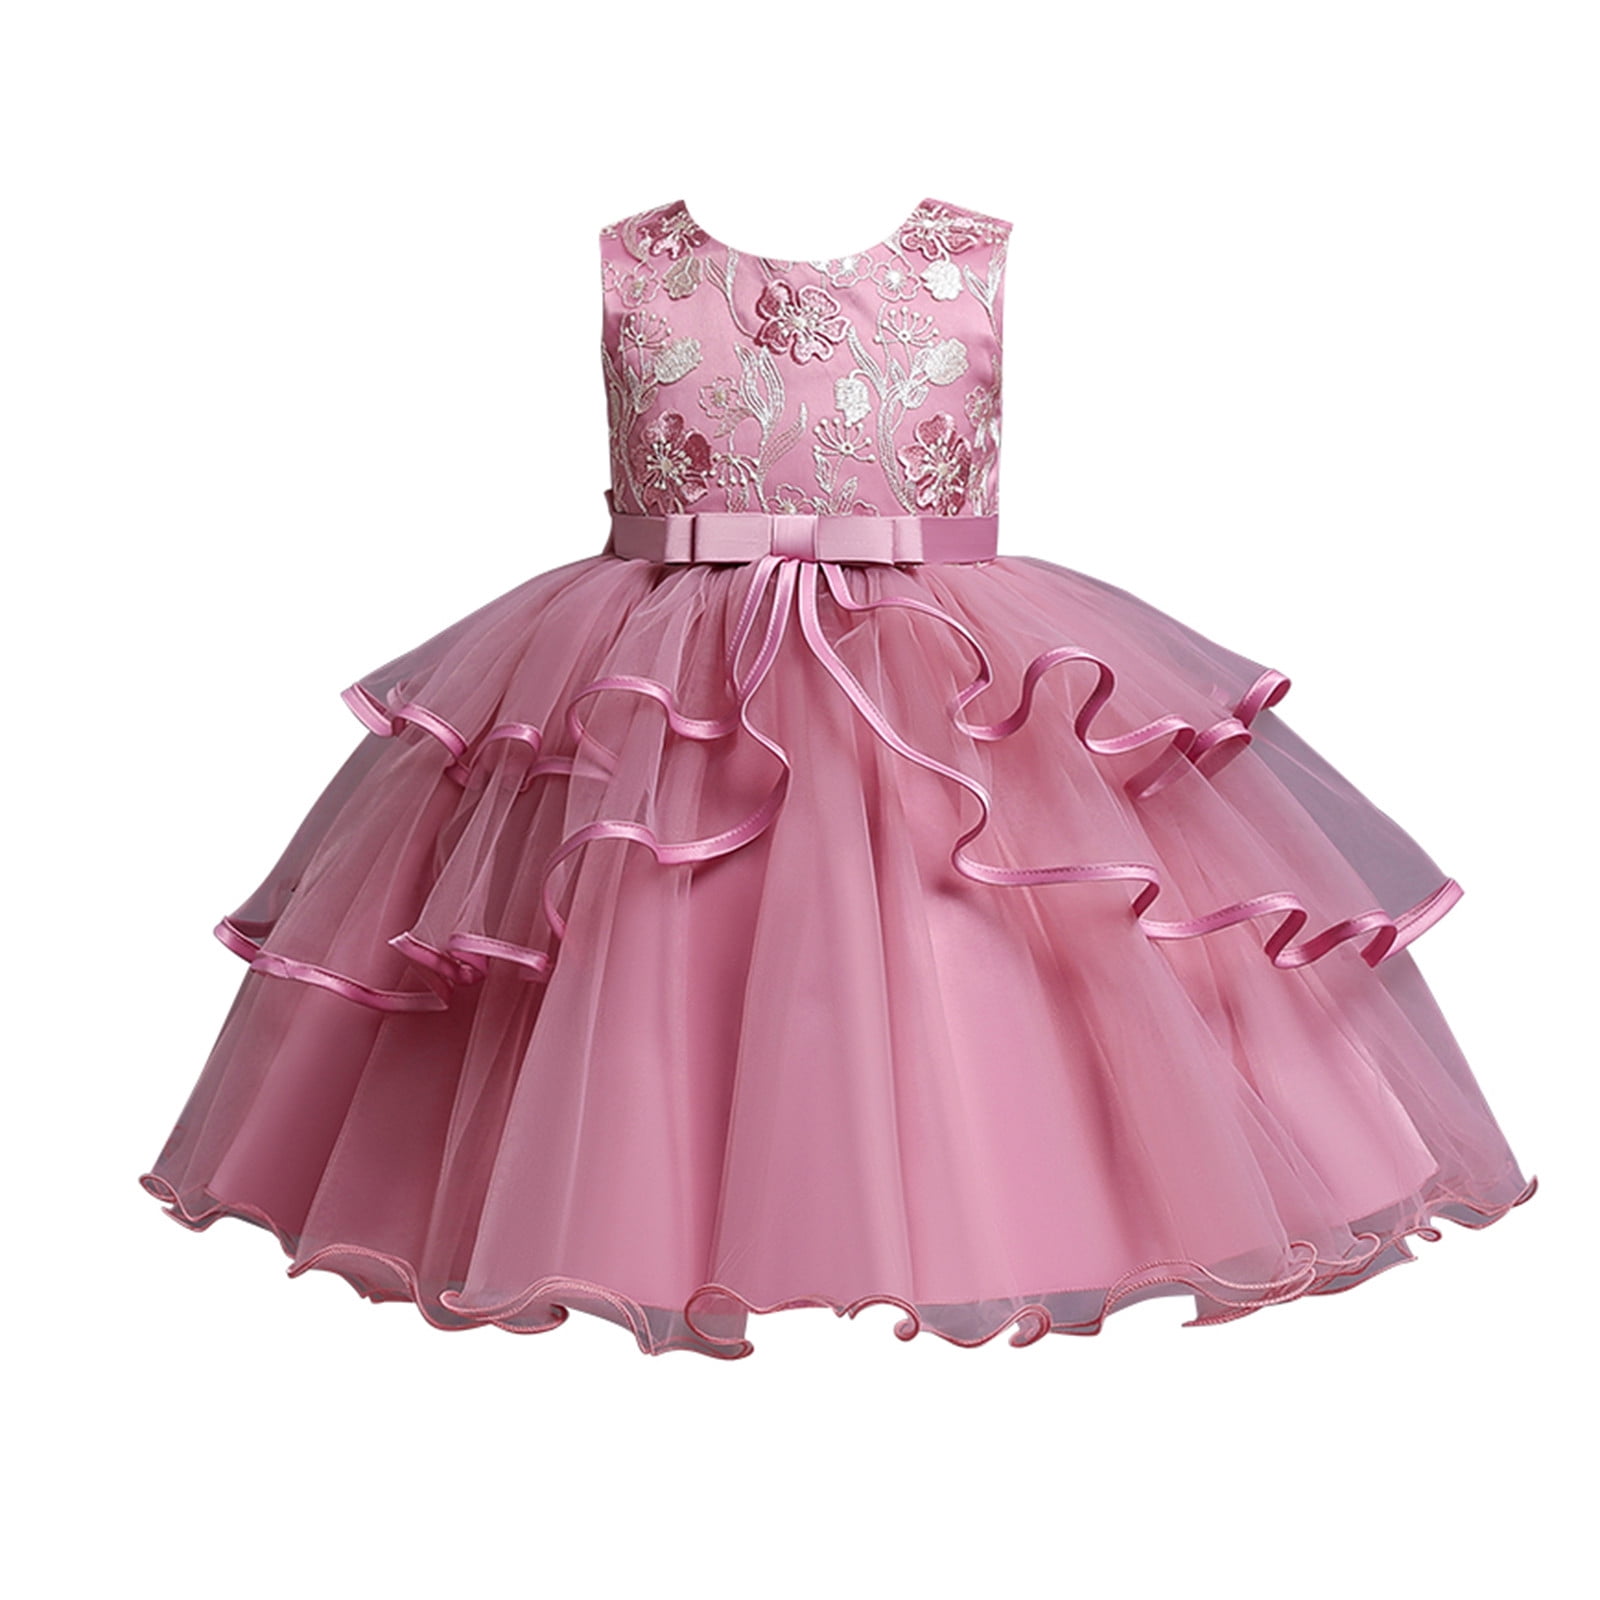 Details about   Childrens Kids Girls Cute Striped Blue and Pink Flower Spring Party Dress Gown 